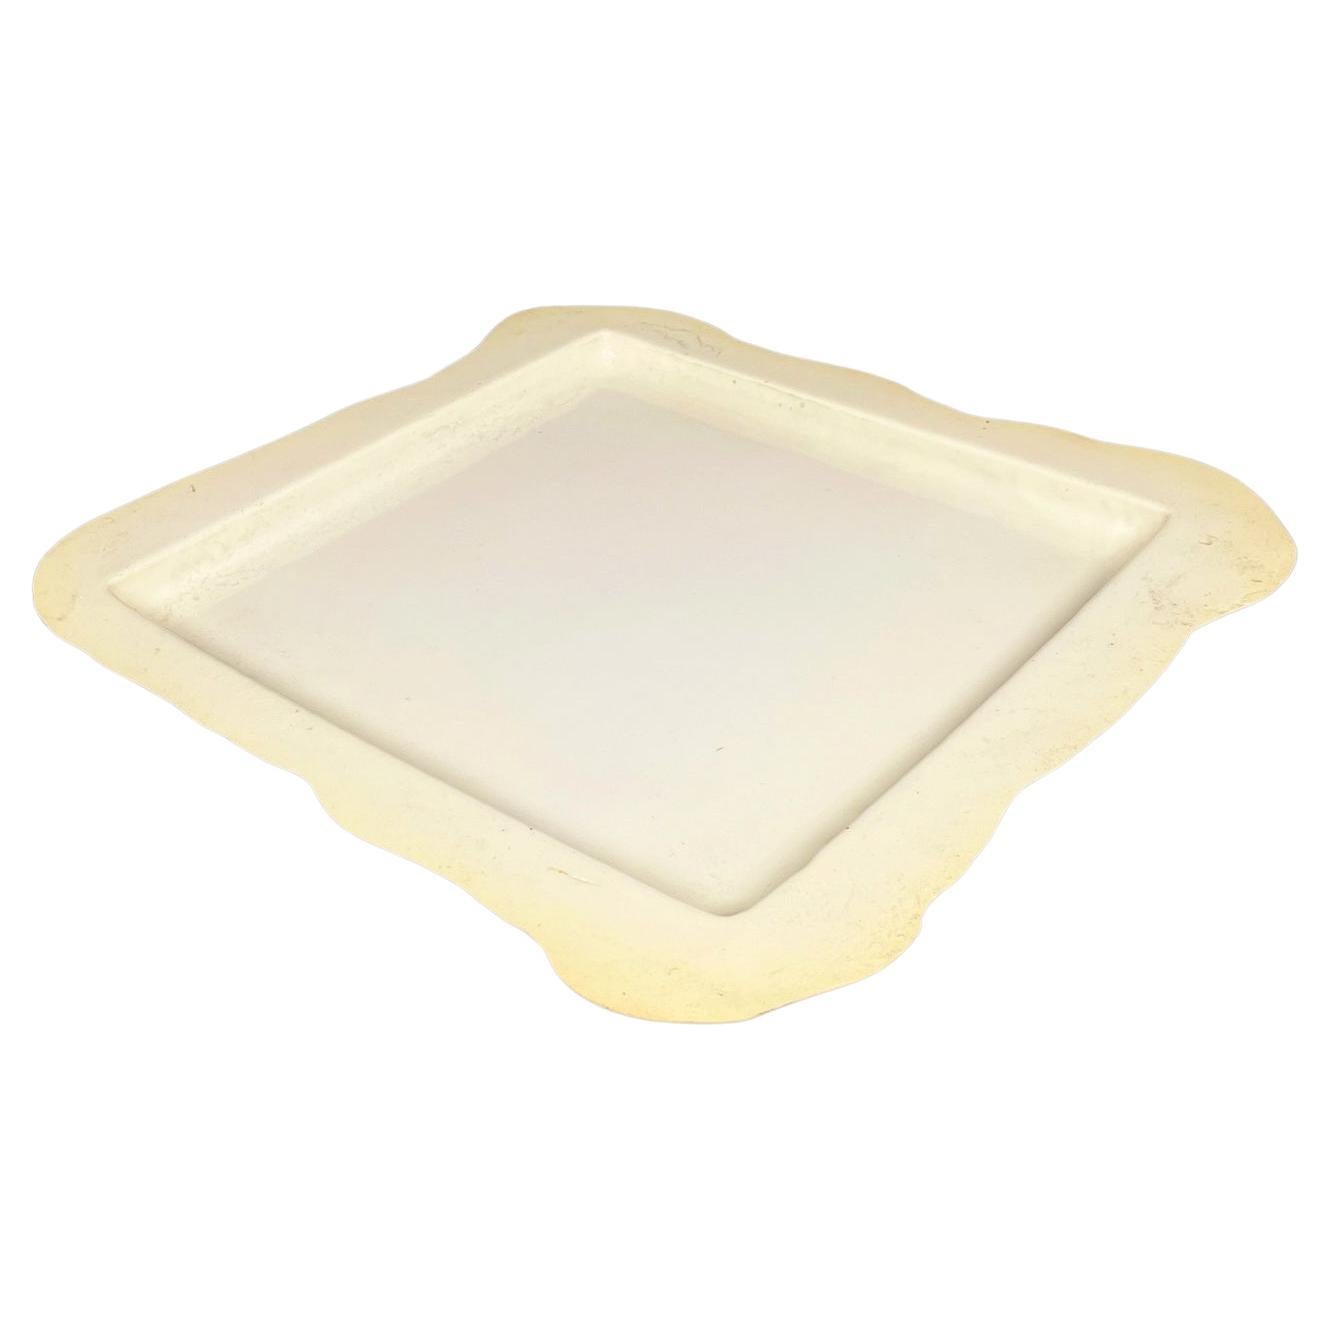 Italian post-modern White Resin try-tray by Gaetano Pesce for Fish Design, 2000s For Sale